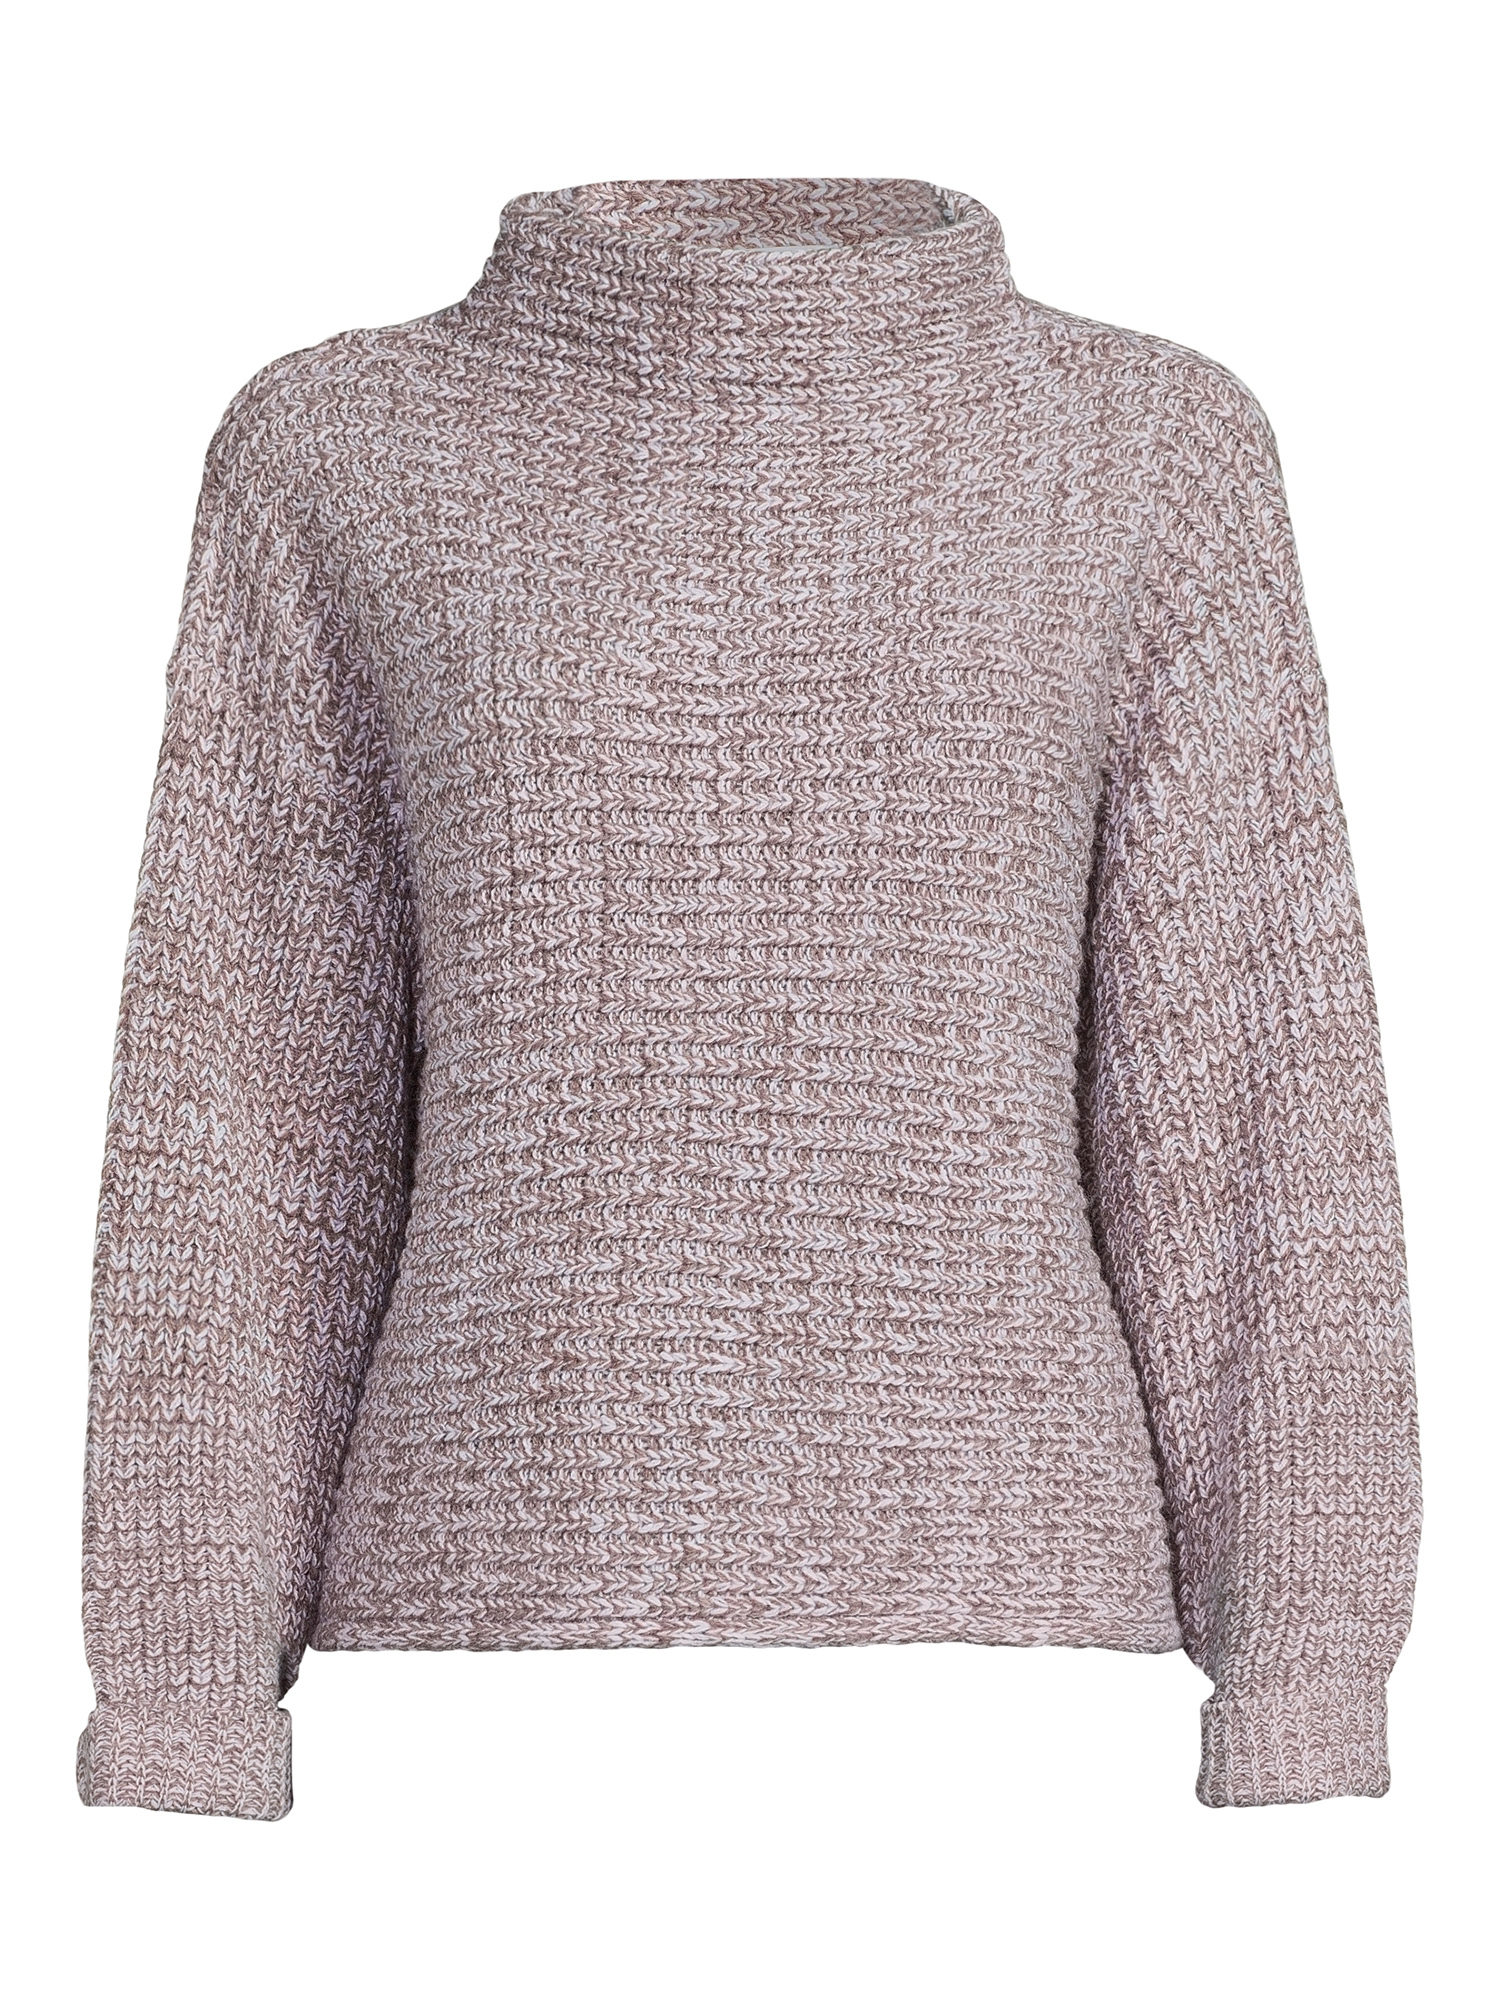 Time and Tru Women's Horizontal Shaker Knit Sweater - image 5 of 5